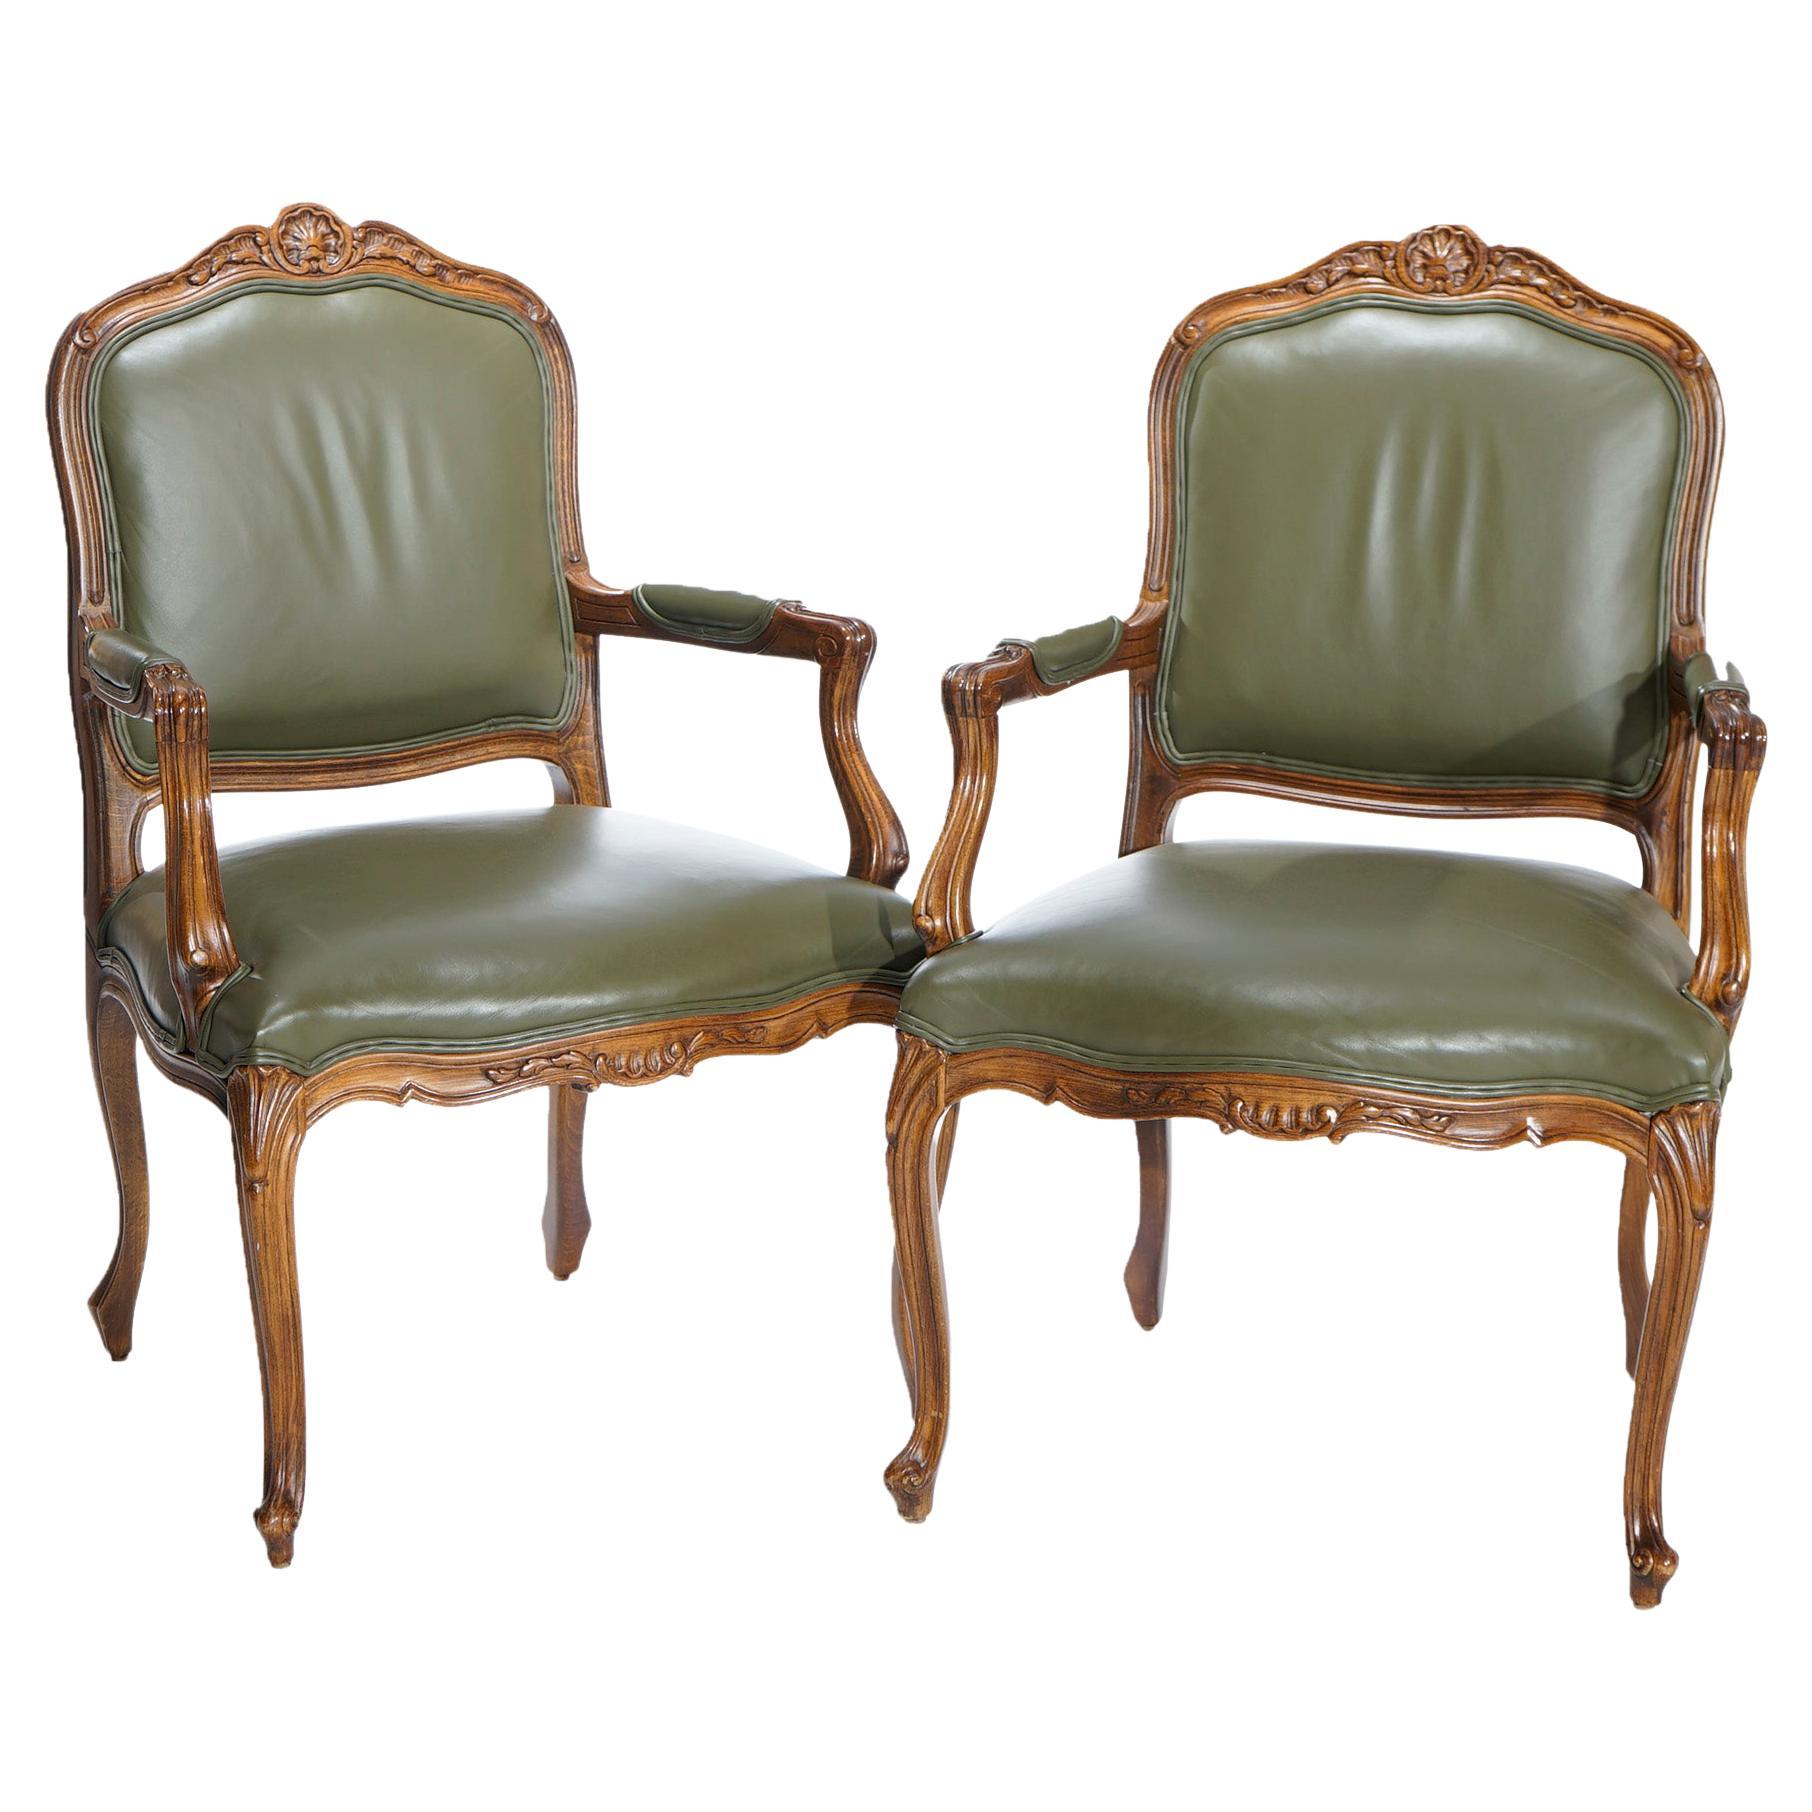 Antique French Louis XV Style Ethan Allen Fruitwood Fauteuil Armchairs 20th C